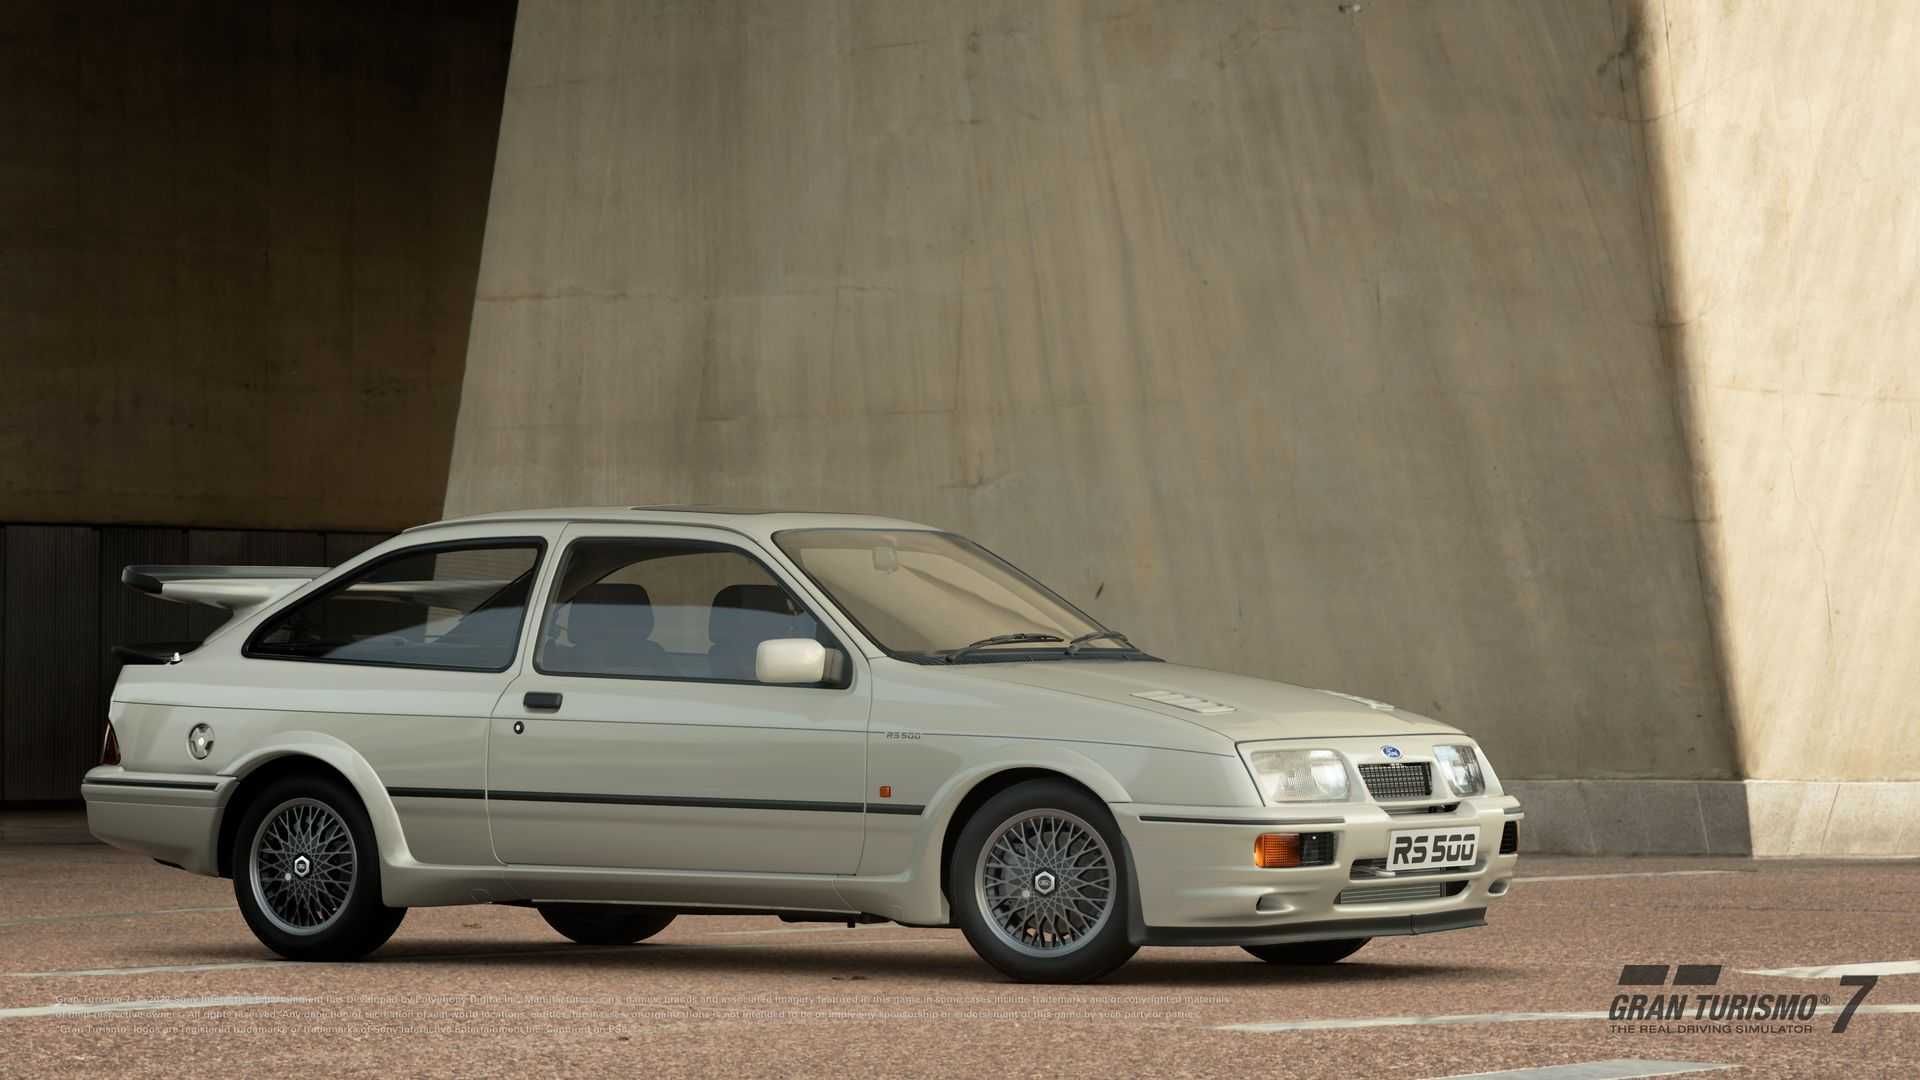 1987 Ford Sierra RS 500 Cosworth Front Quarter View Gran Turismo 7